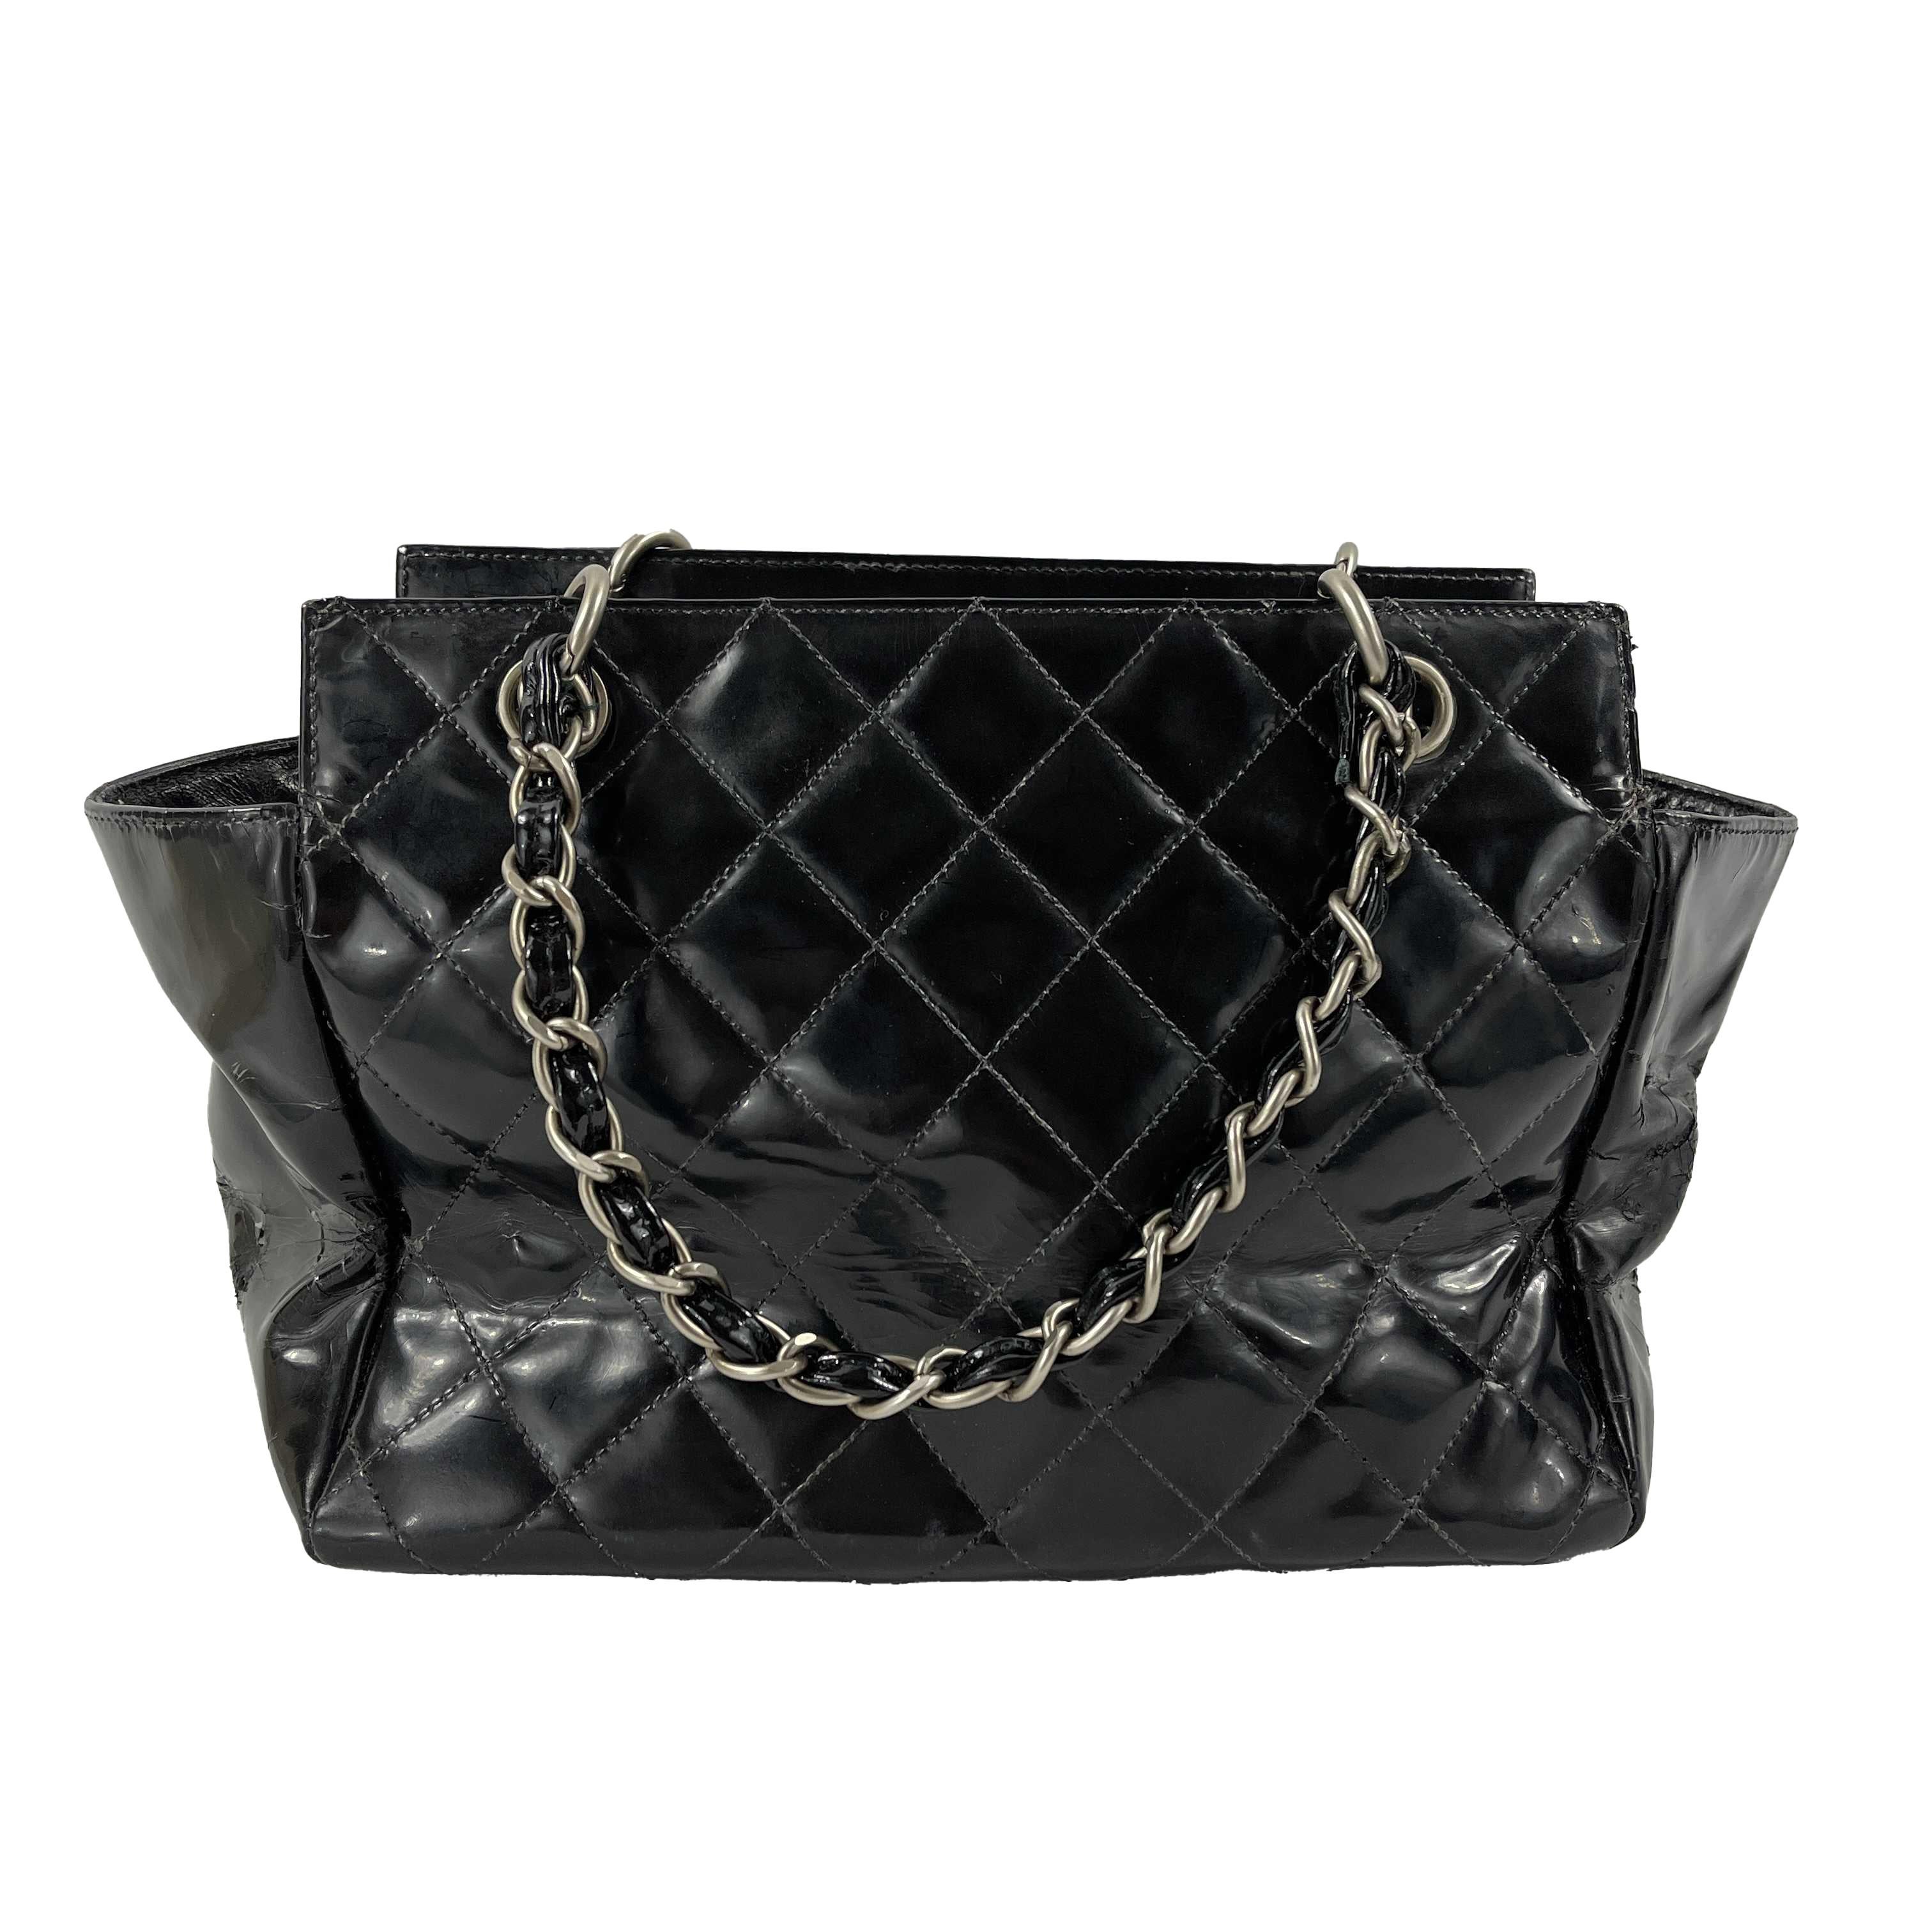 CHANEL - Vintage Black / Silver Patent CC Quilted Petite Timeless Medium Tote

Description

Vintage era 2000-2002 by Karl Lagerfeld.
Black patent quilted leather with stitched CC logo on front.
Matte silver tone hardware.
Chain link threaded